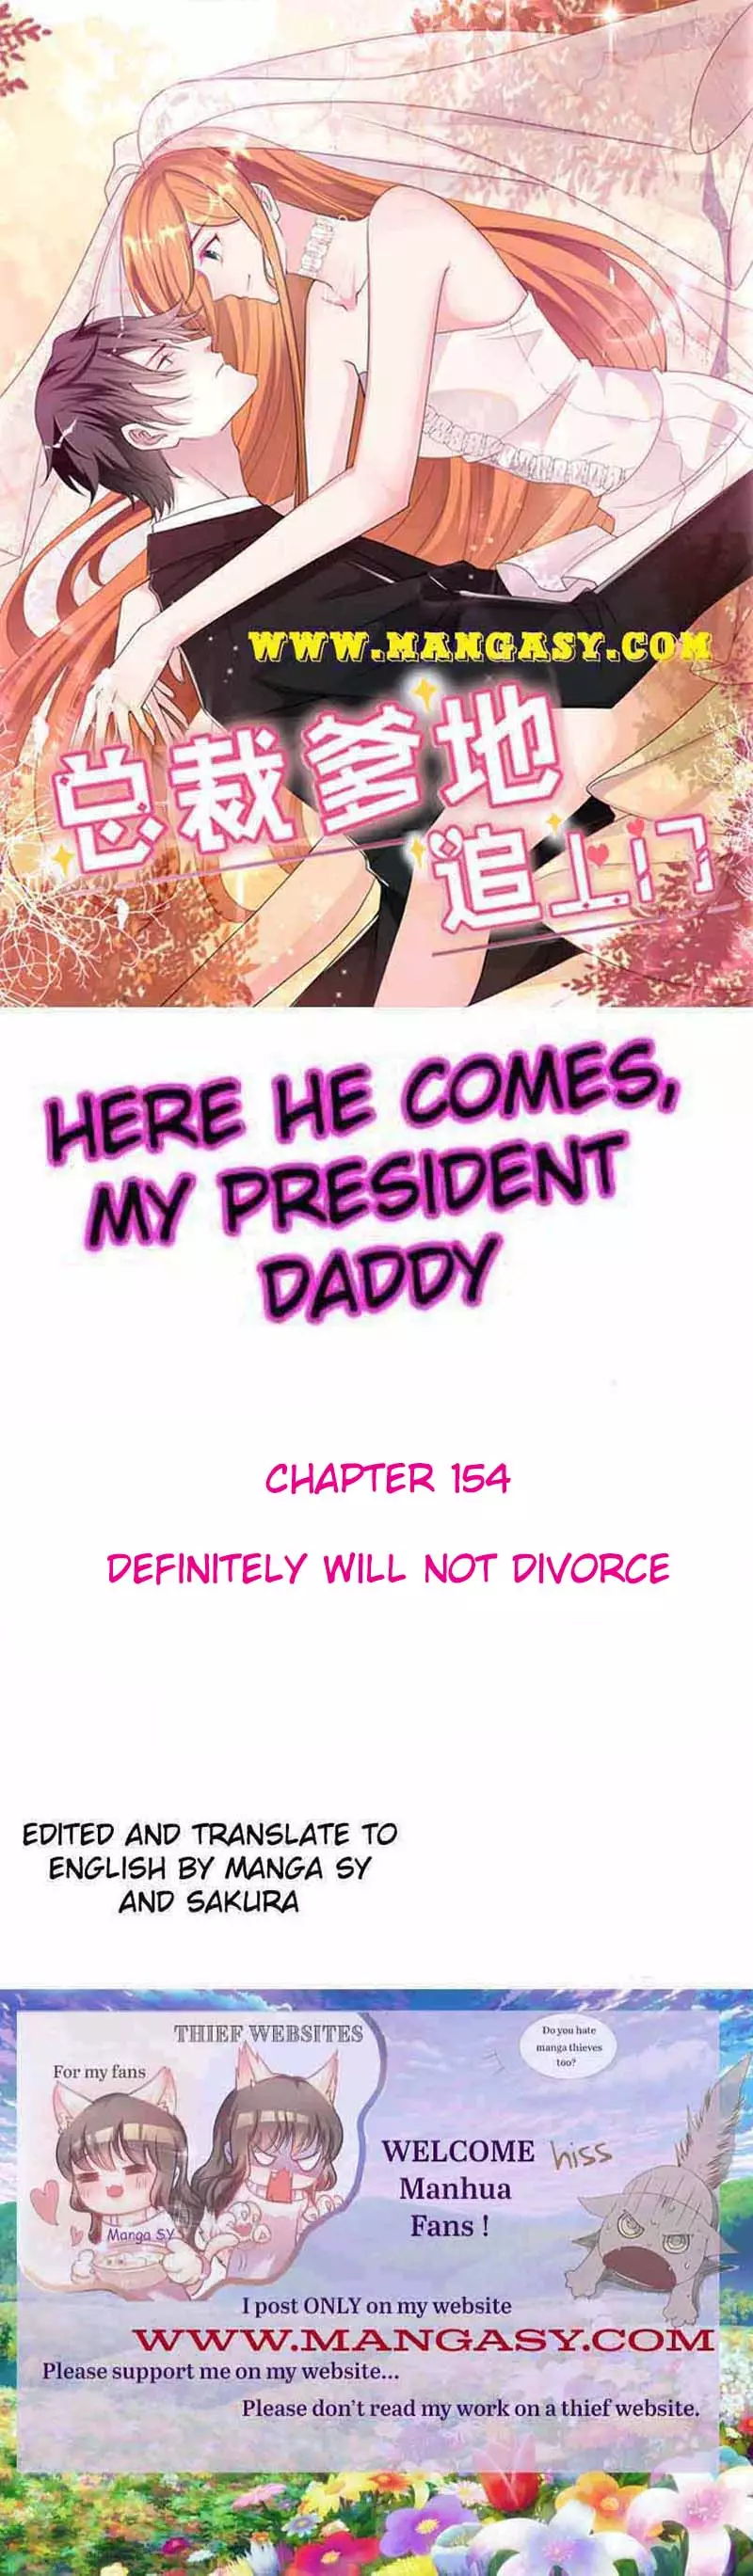 President Daddy Is Chasing You - 154 page 1-cbdef566